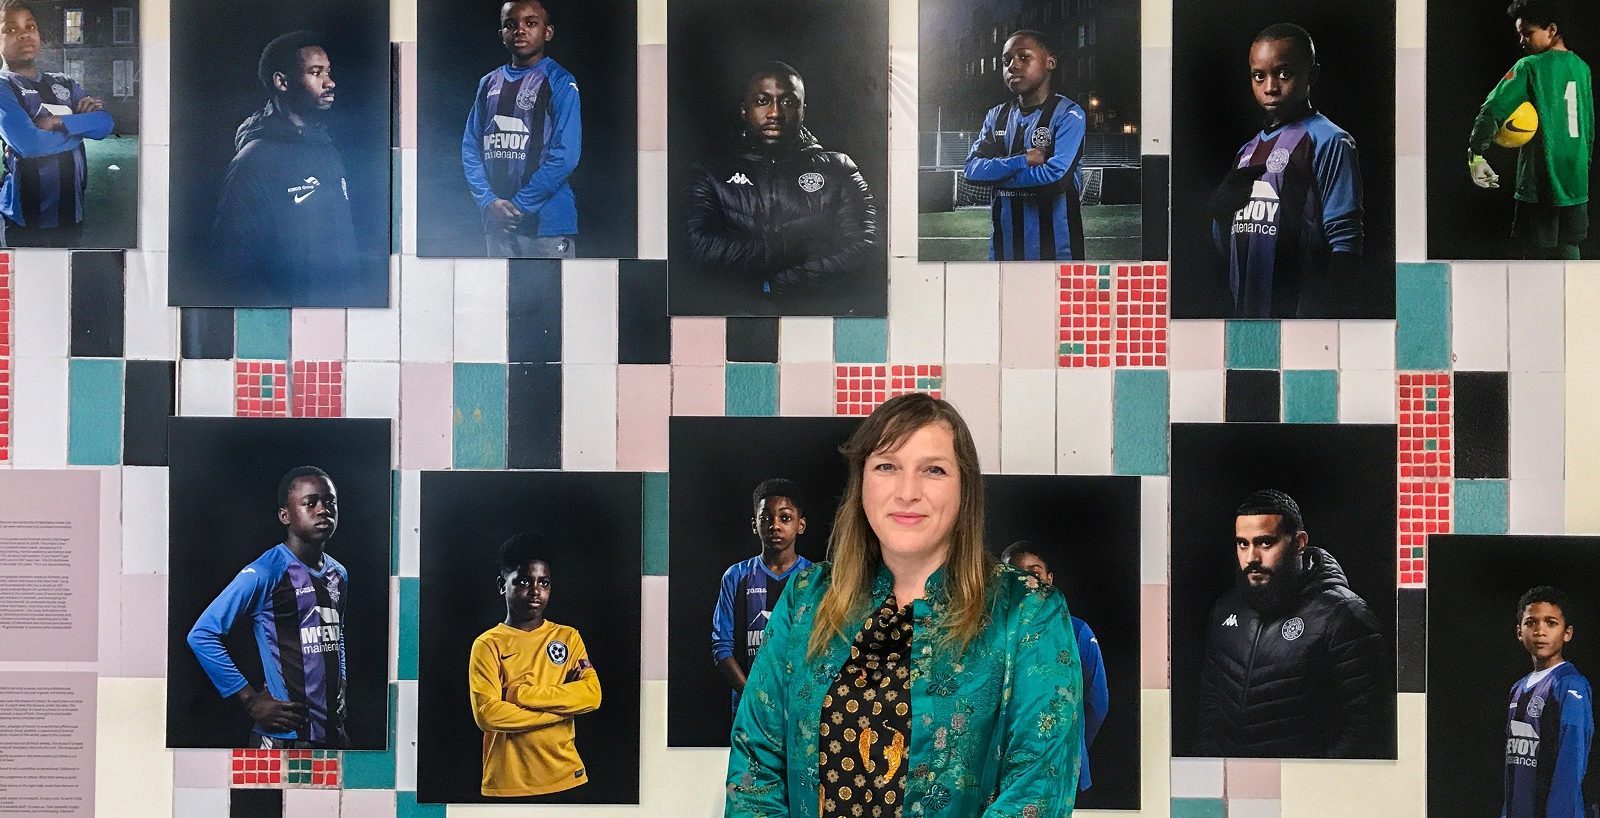 Photographer Ellie Laycock with her photos of St Matthews football coaching team representing 'leadership'